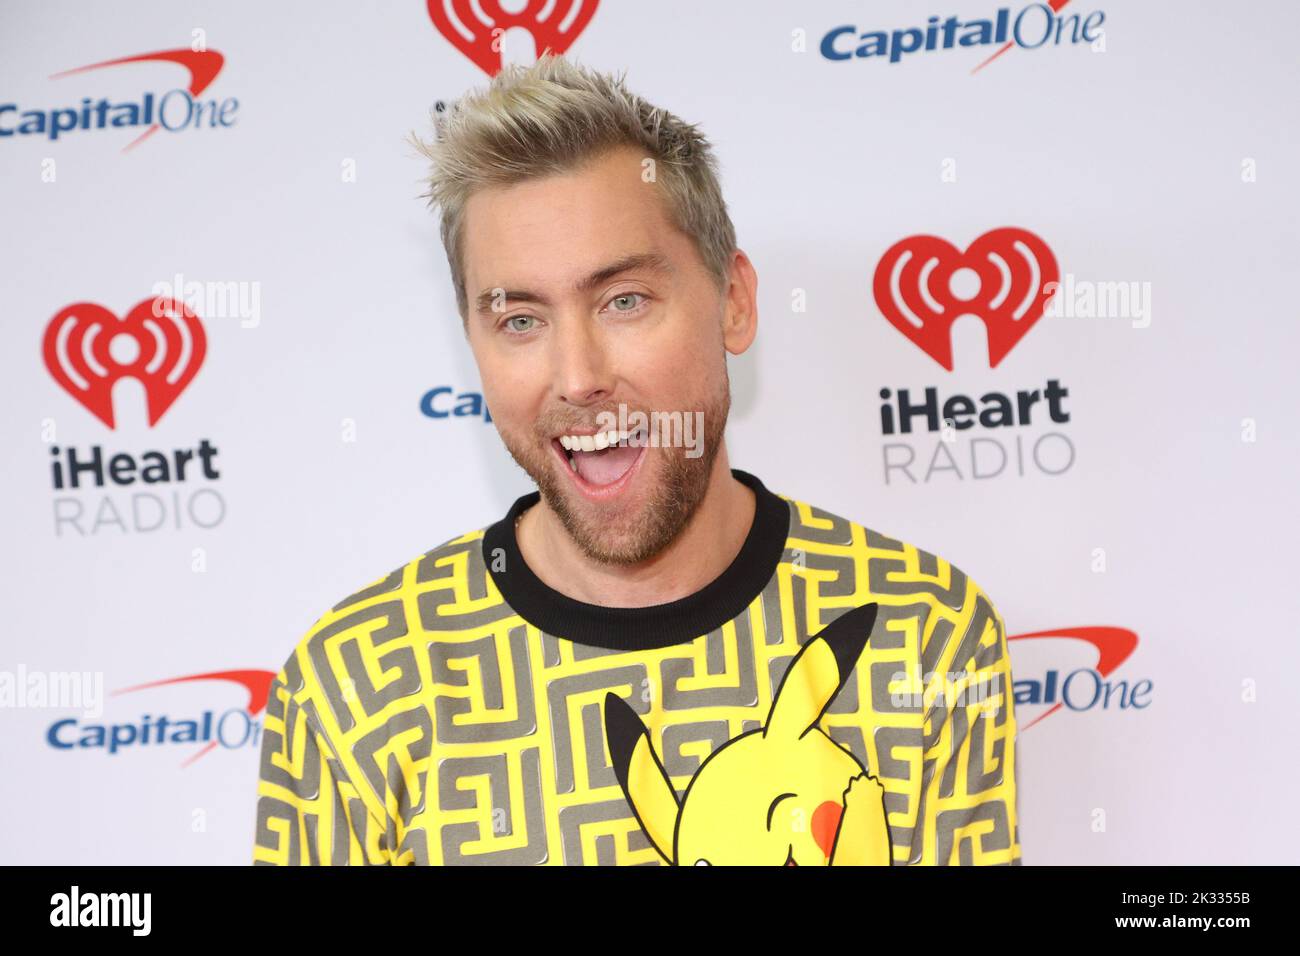 Las Vegas, United States. 23rd Sep, 2022. Lance Bass arrives for the iHeartRadio Music Festival at T-Mobile Arena in Las Vegas, Nevada on Friday, September 23, 2022. Photo by James Atoa/UPI Credit: UPI/Alamy Live News Stock Photo